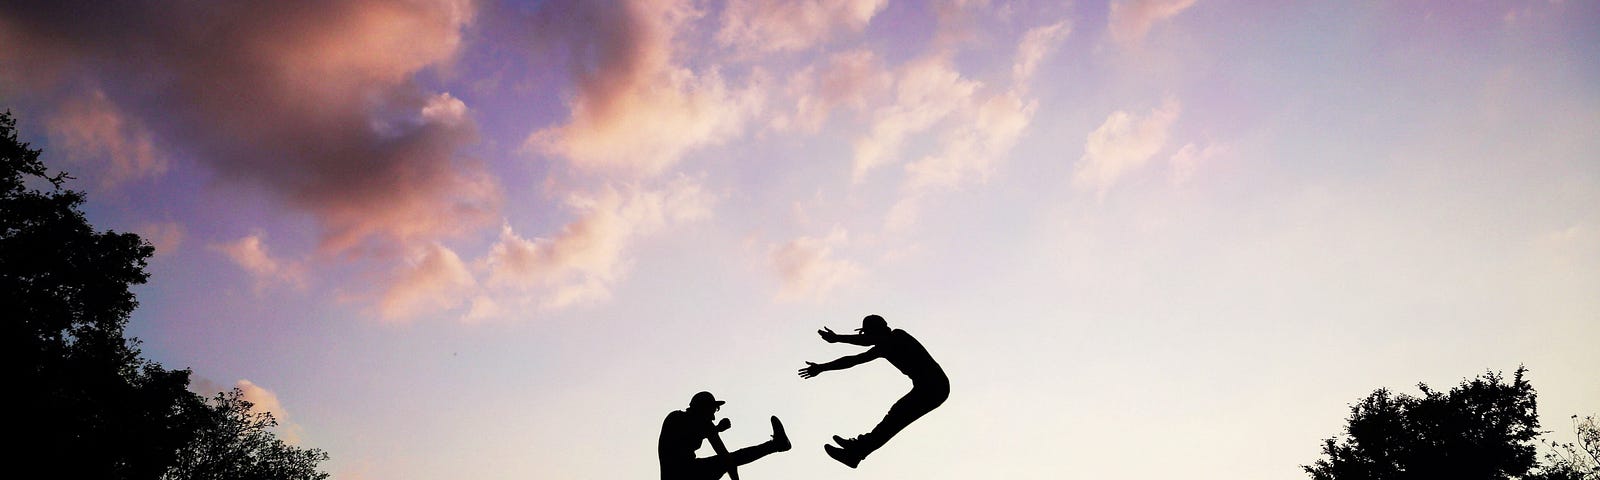 A man is sent flying through the air, presumably from a hard kick in the pants, against the backdrop of a beautiful sunrise